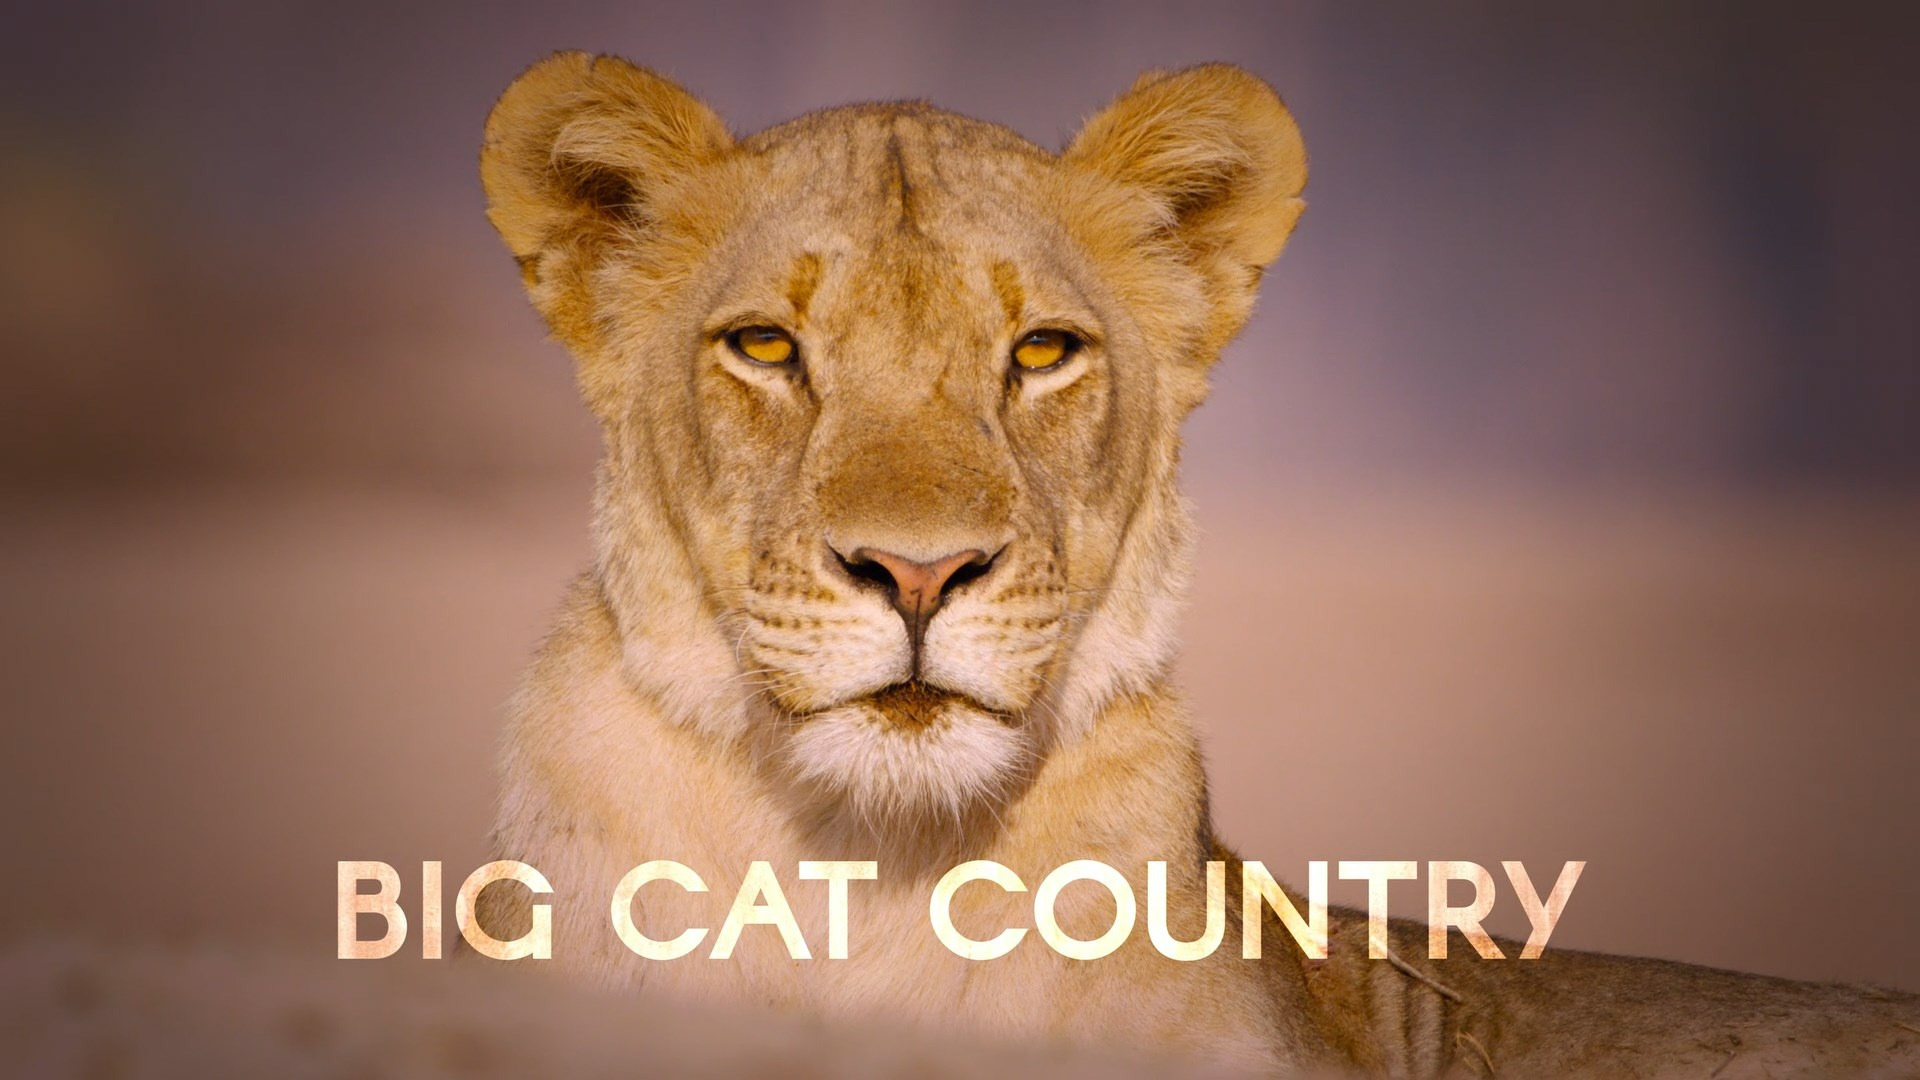 Show Big Cat Country